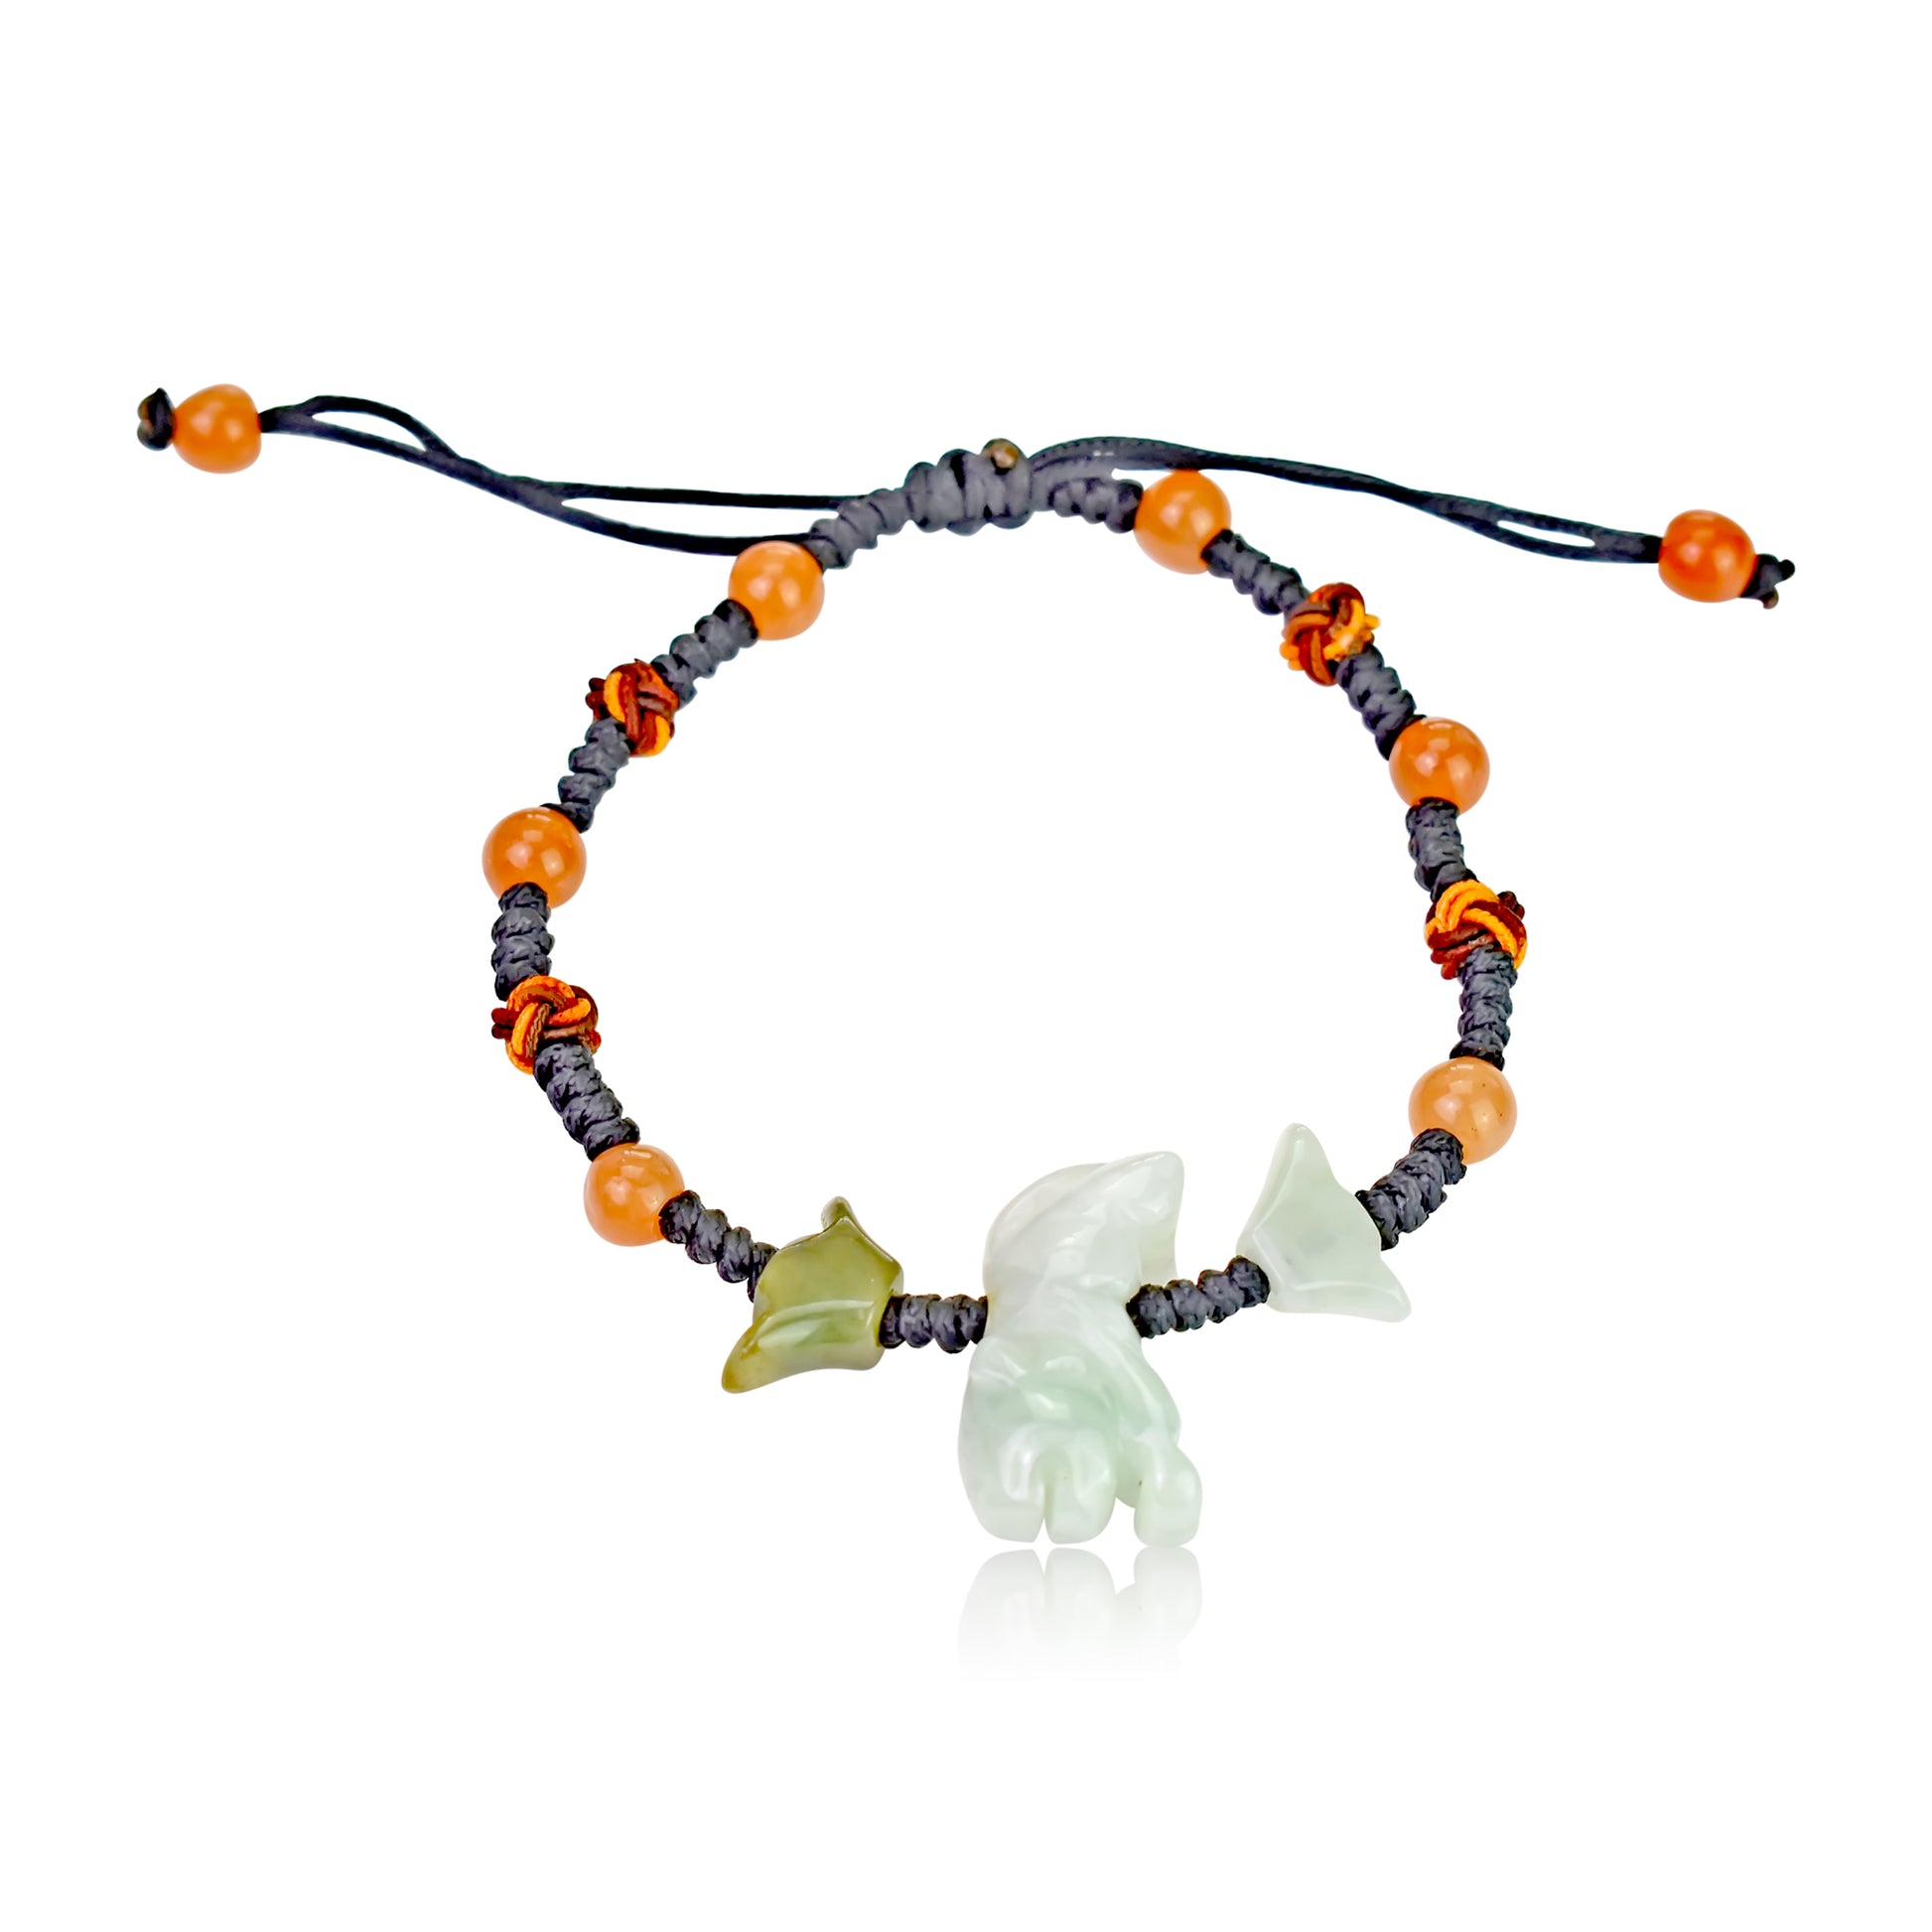 Step Into Your Inner Power with a Tiger Beaded Jade Bracelet made with Black Cord